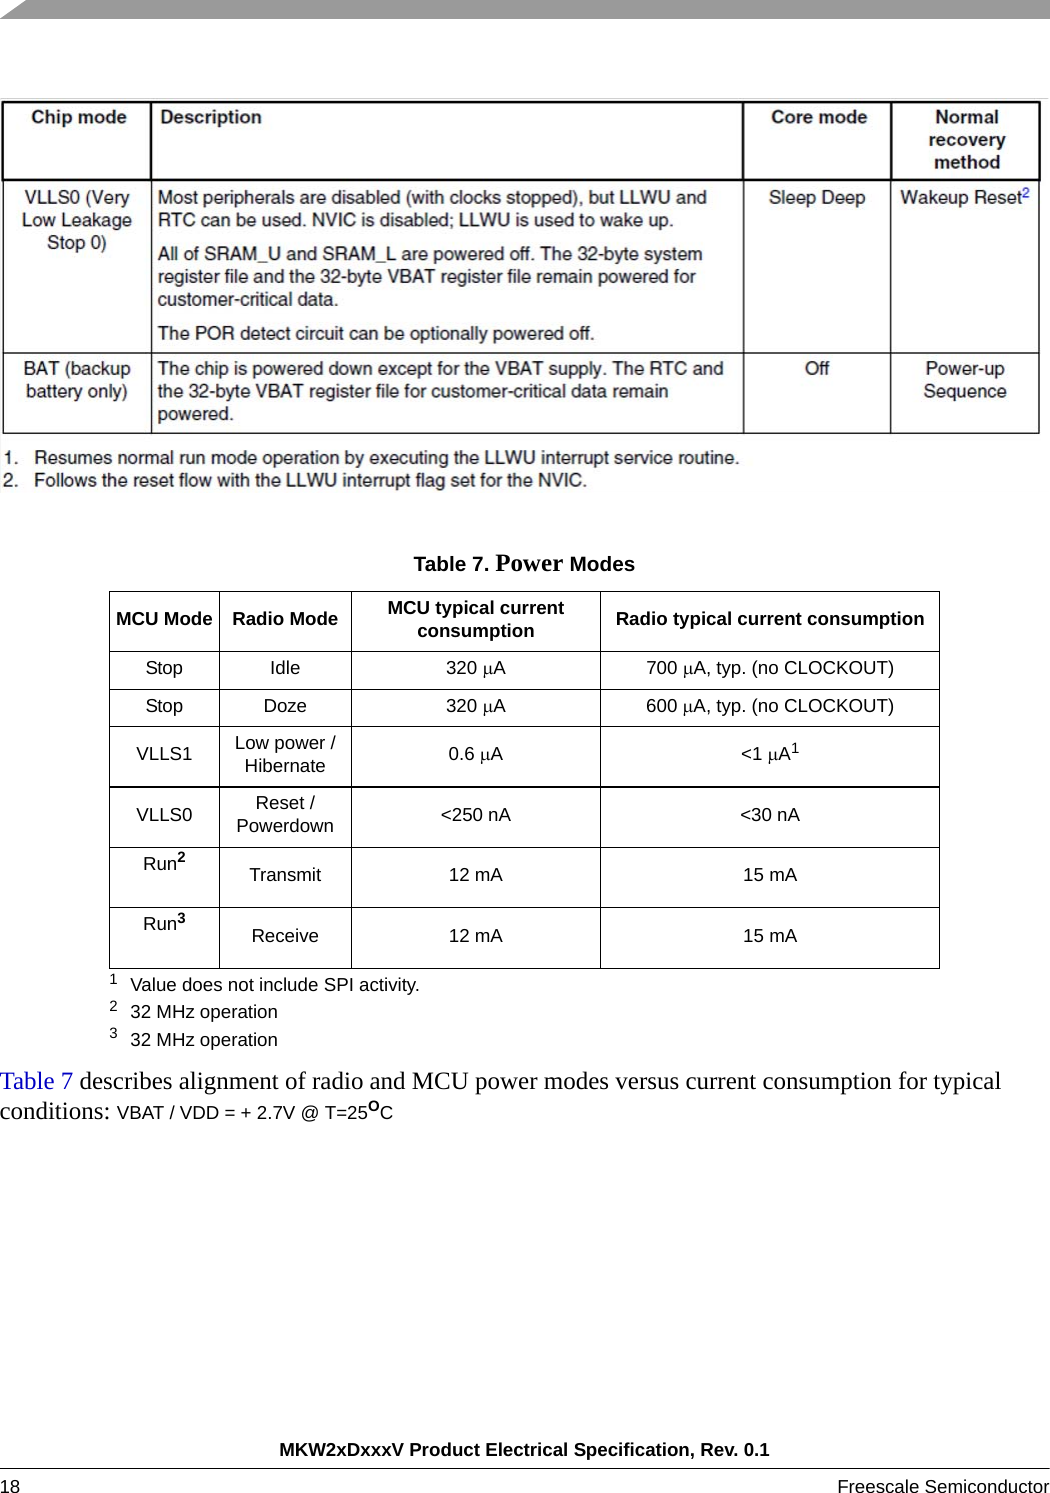 MKW2xDxxxV Product Electrical Specification, Rev. 0.118 Freescale Semiconductor Table 7 describes alignment of radio and MCU power modes versus current consumption for typical conditions: VBAT / VDD = + 2.7V @ T=25OCTable 7. Power Modes MCU Mode Radio Mode MCU typical current consumption Radio typical current consumptionStop Idle 320 A700 A, typ. (no CLOCKOUT)Stop Doze 320 A600 A, typ. (no CLOCKOUT)VLLS1 Low power / Hibernate 0.6 A&lt;1 A11Value does not include SPI activity. VLLS0 Reset / Powerdown &lt;250 nA &lt;30 nARun2232 MHz operationTransmit 12 mA 15 mARun3332 MHz operationReceive 12 mA 15 mA